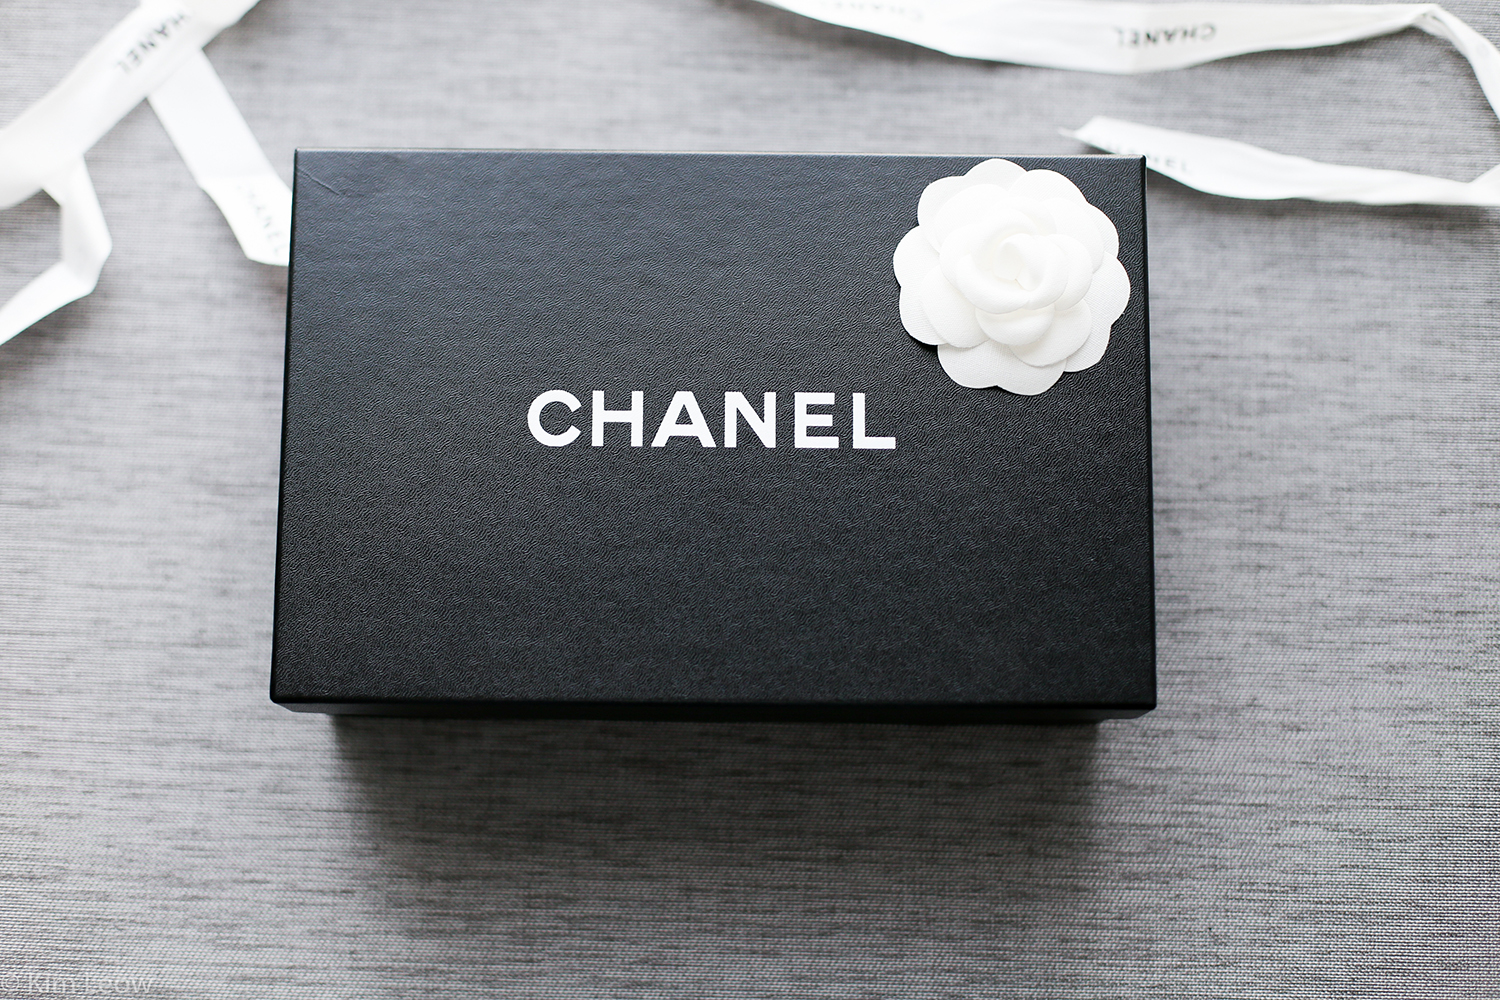 Chanel Affordable Black Friday Preview and Unboxing! THIS WILL